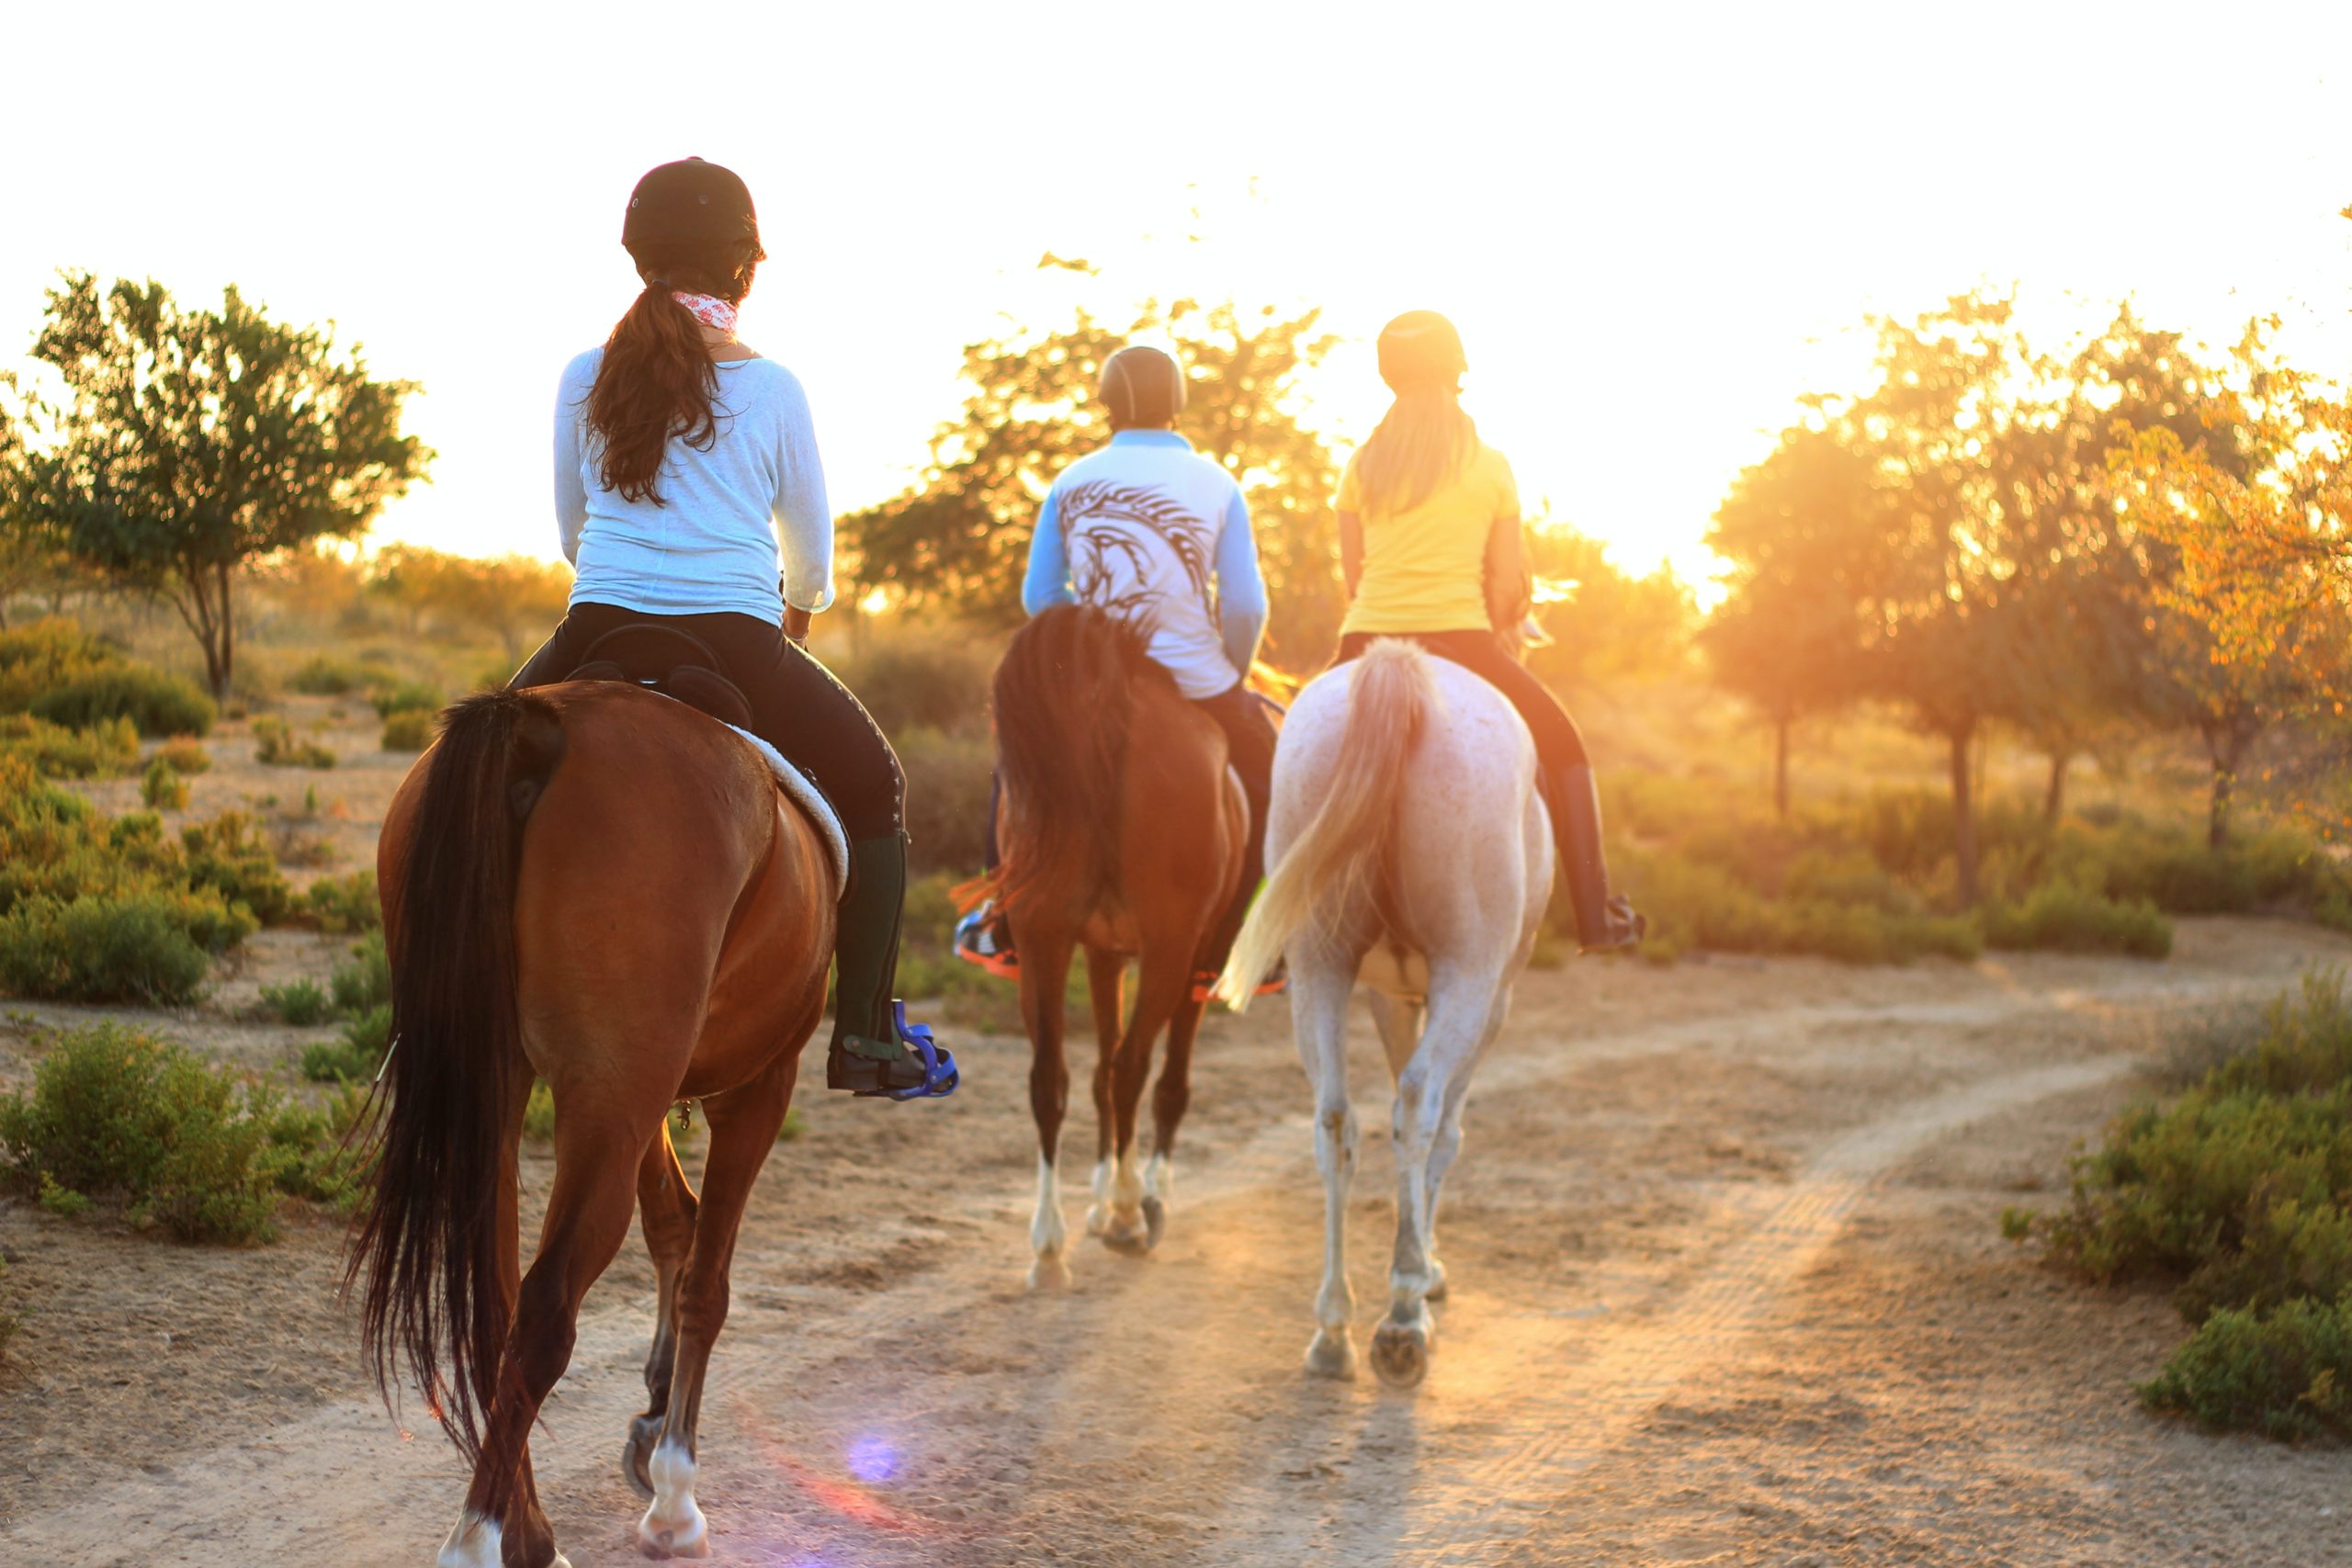 Three horses and their riders follow a trail at sunset.